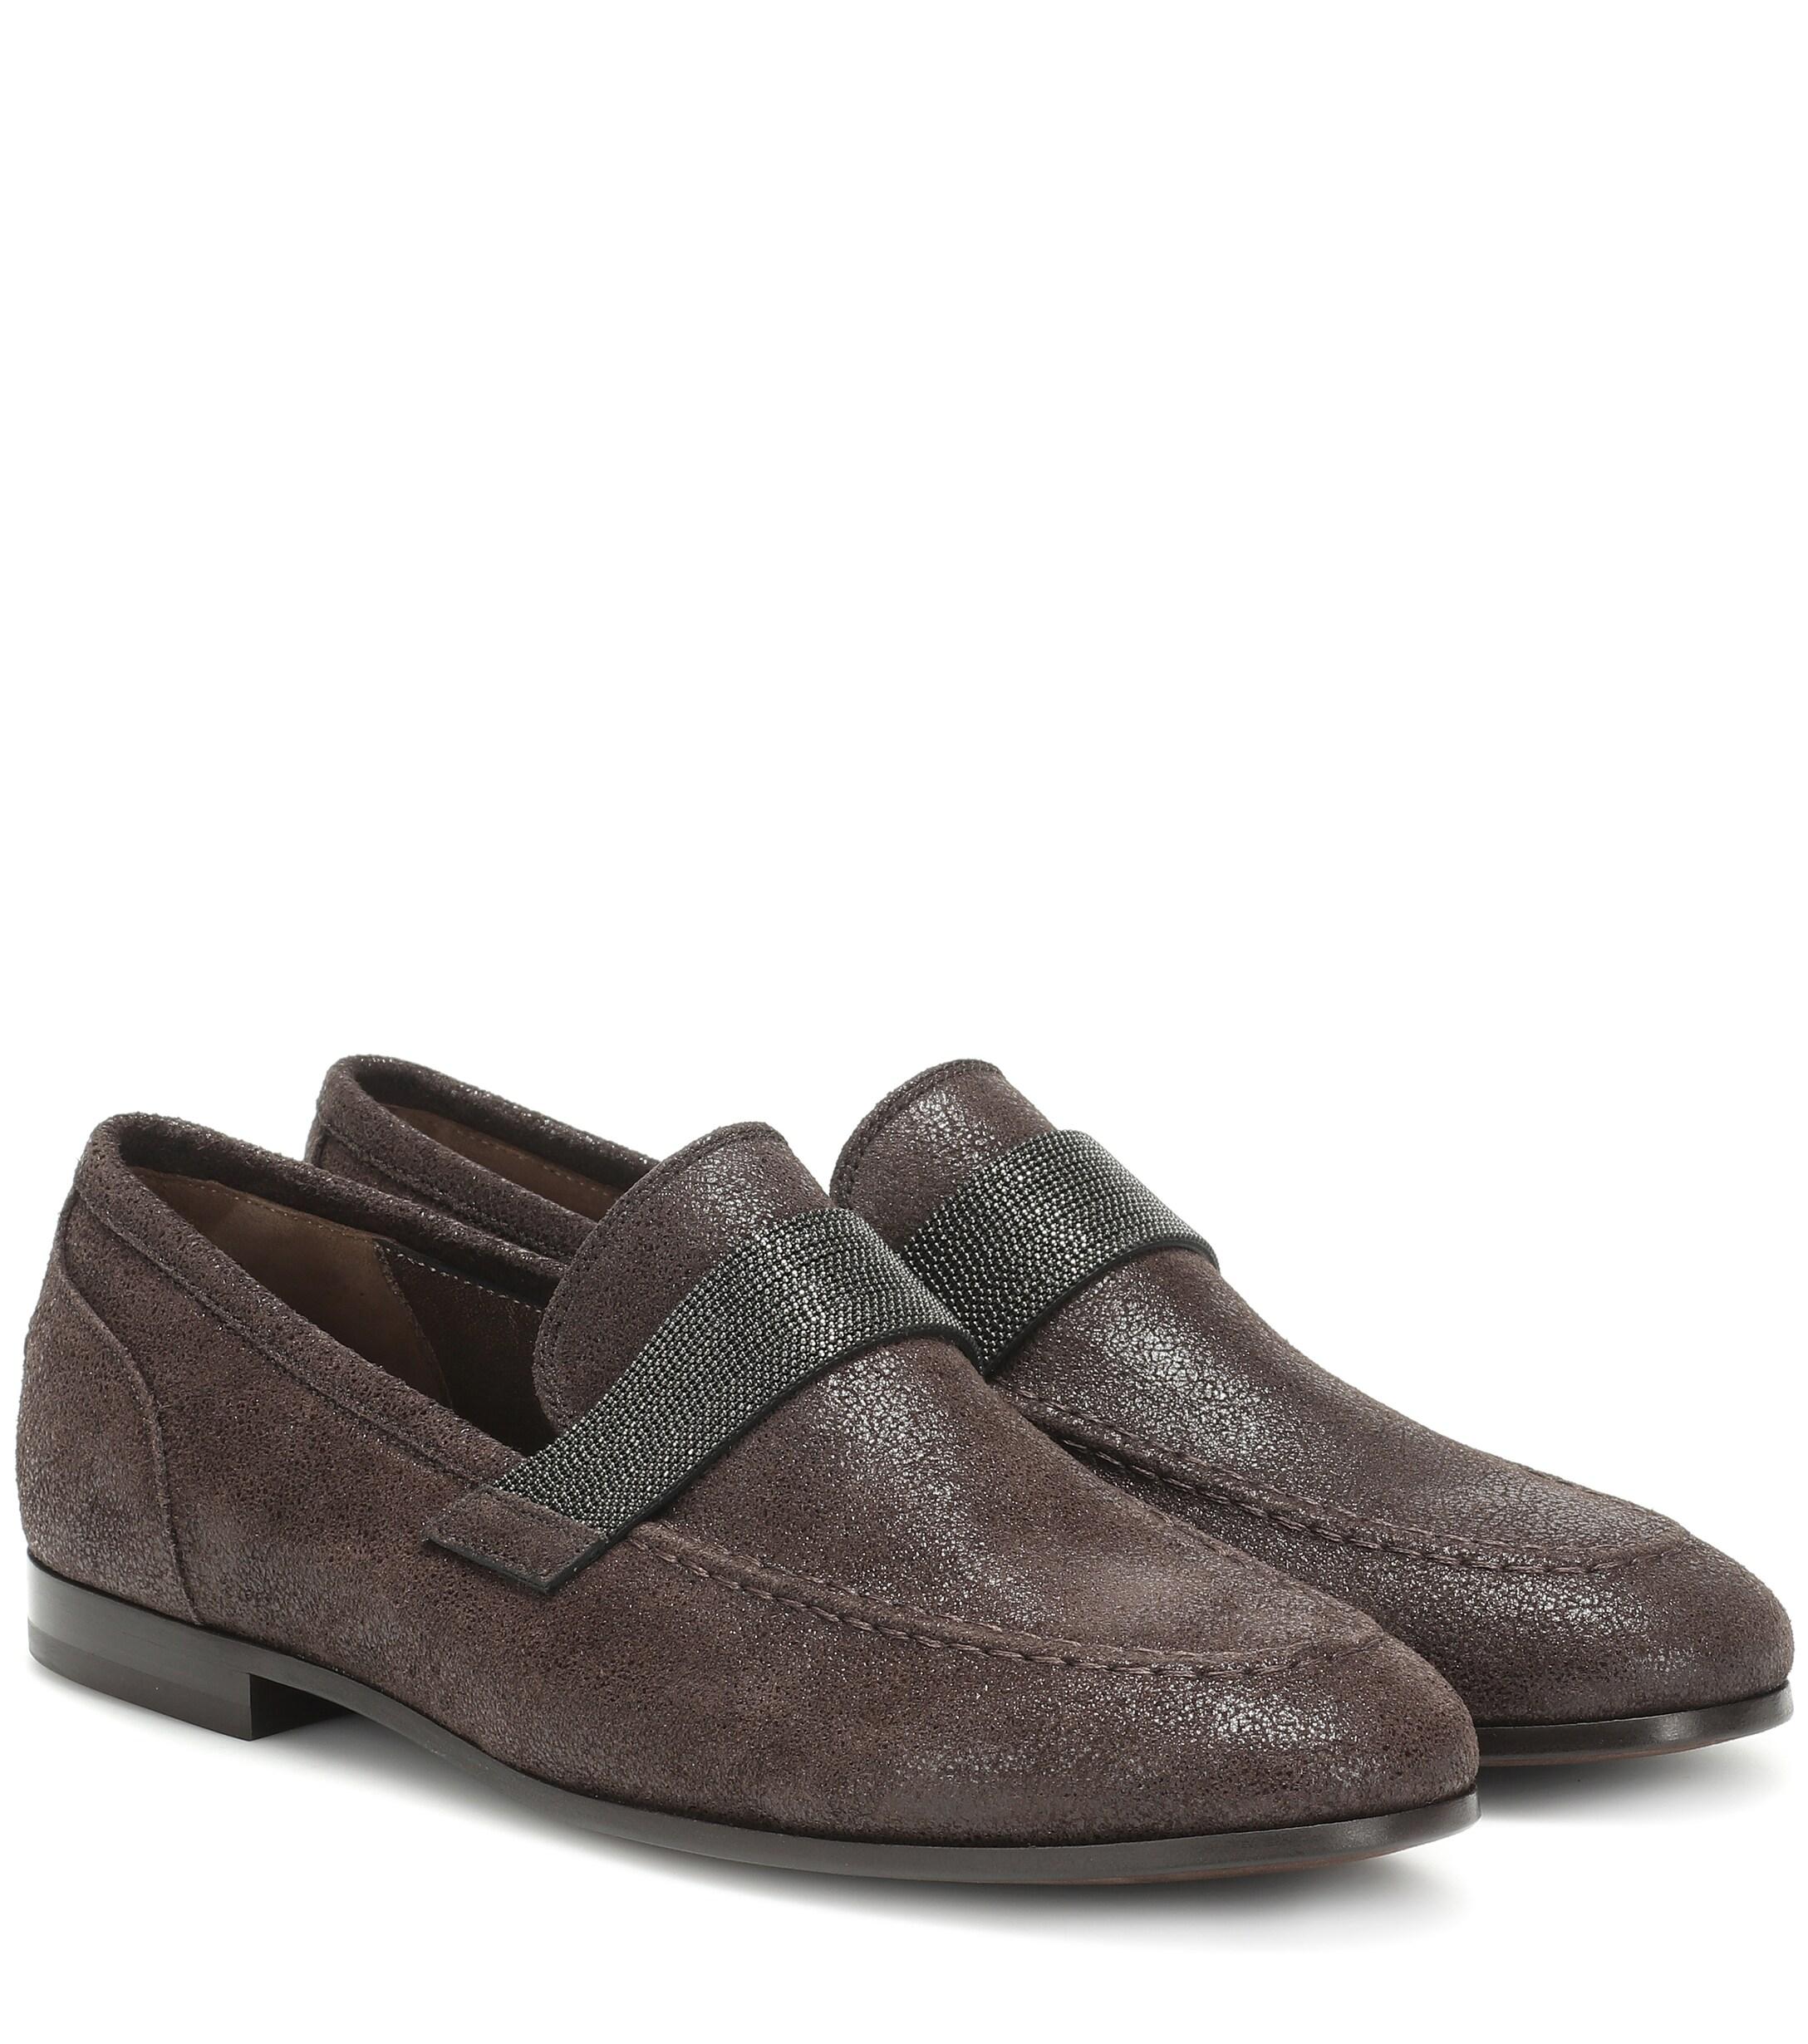 Brunello Cucinelli Embellished Leather Loafers in Brown - Lyst